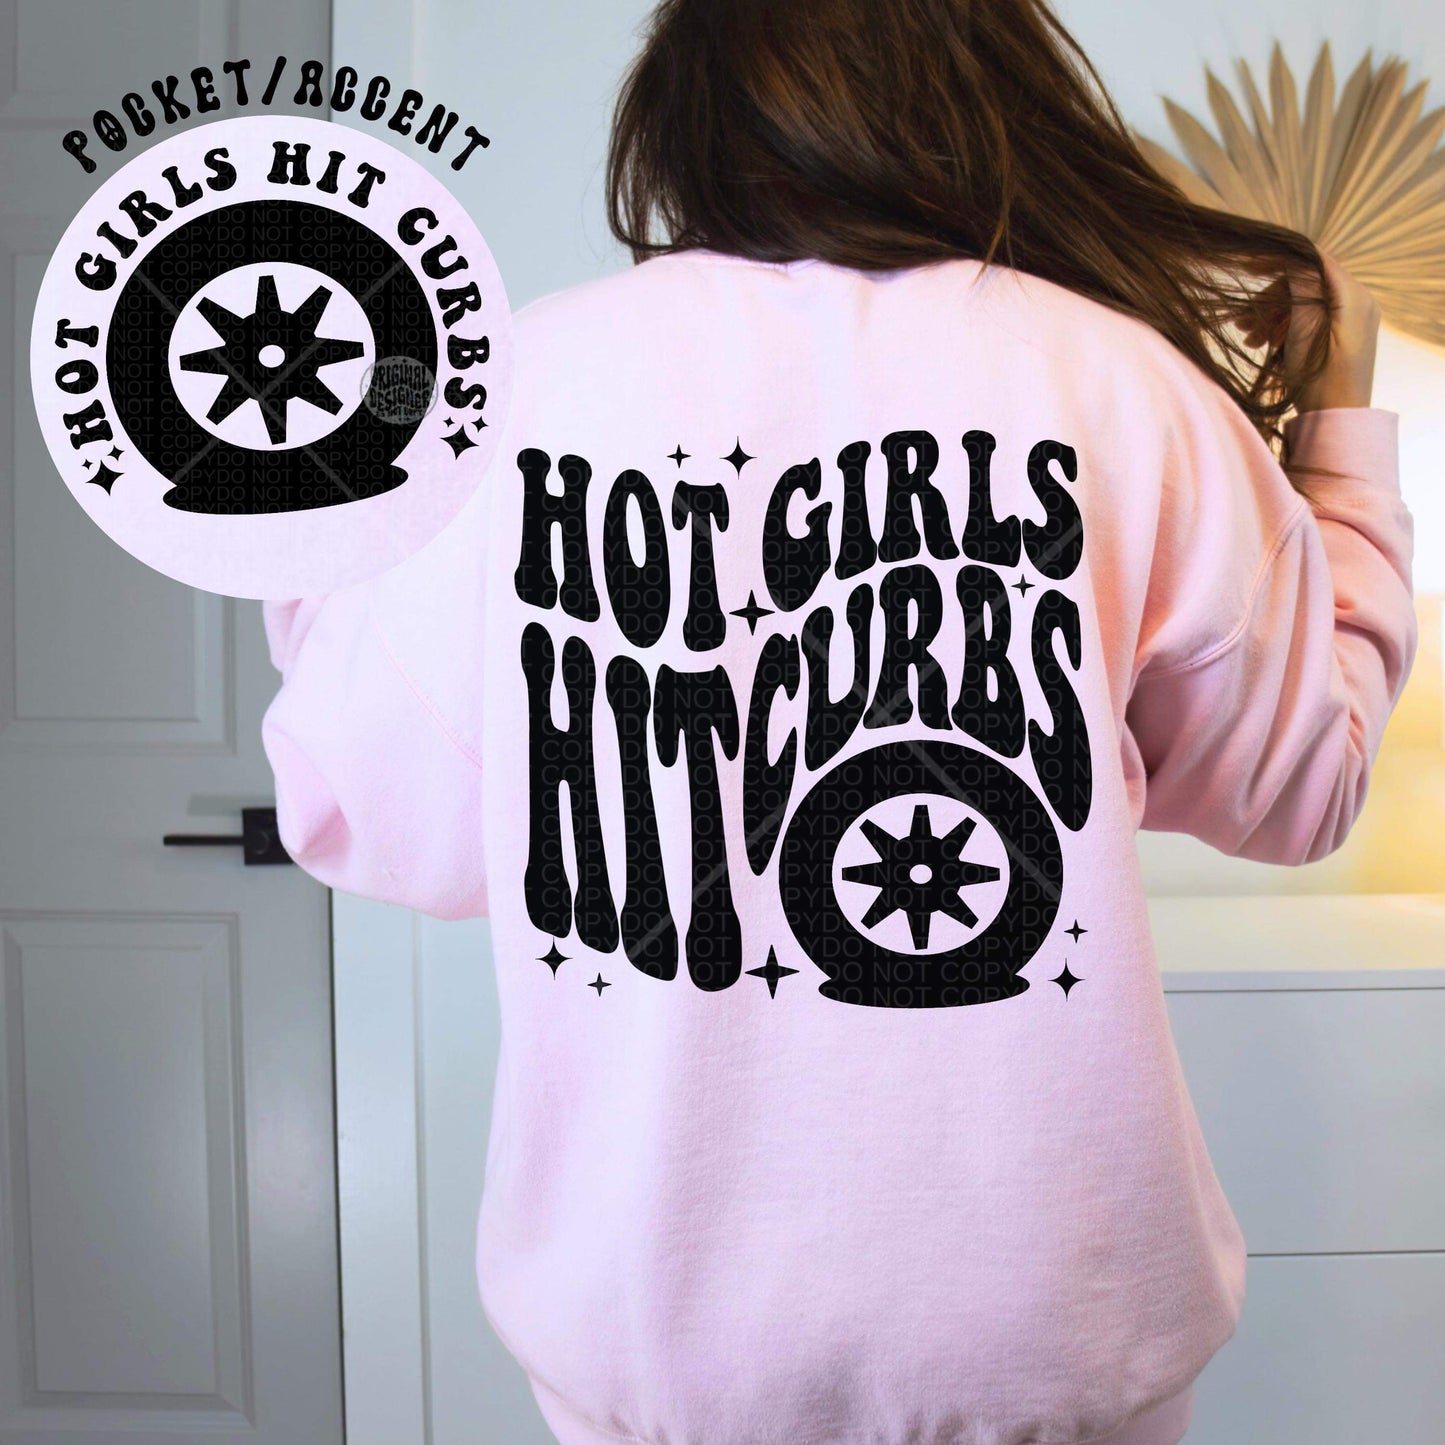 Hot Girls Hit Curbs- Front & Back *Ollie & Co. Exclusive*